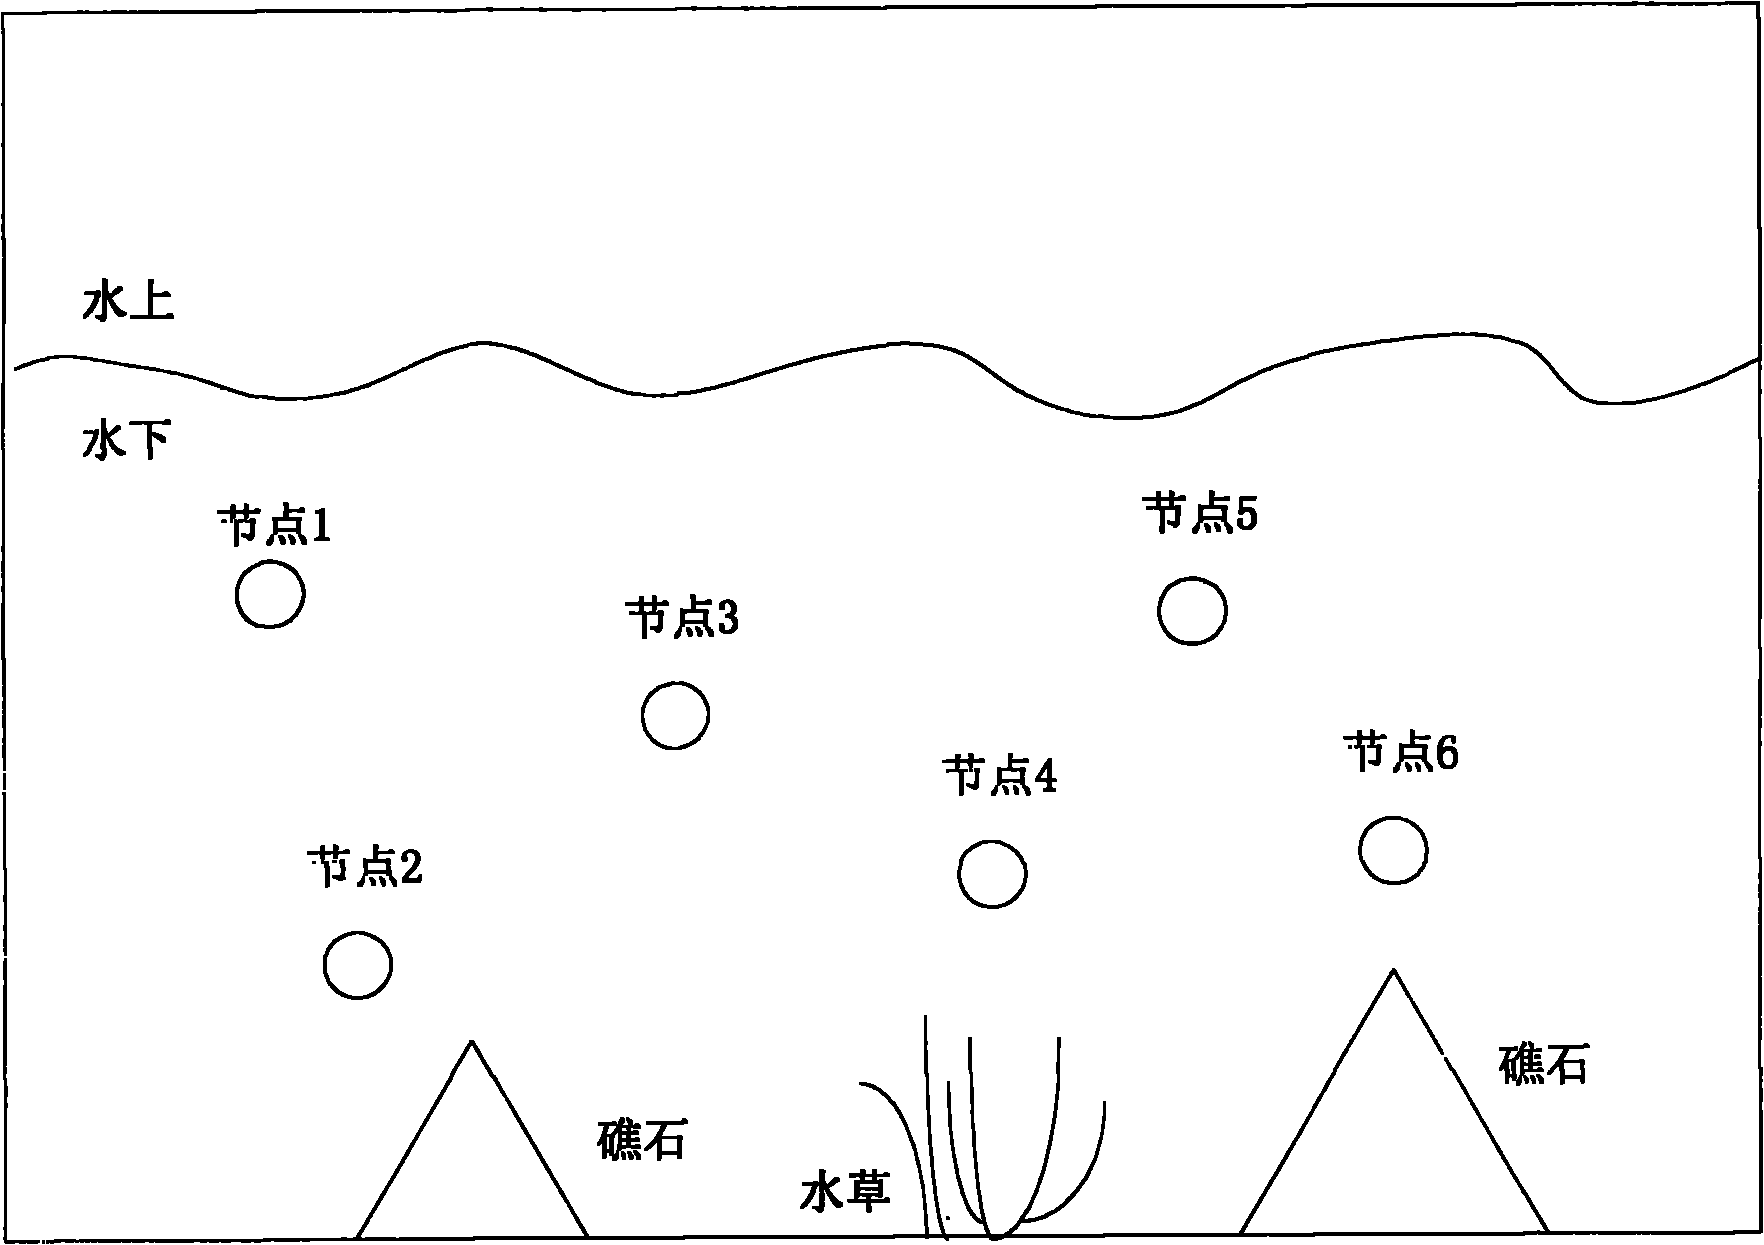 Underwater multi-path communication method based on frequency spectrum perception and prediction